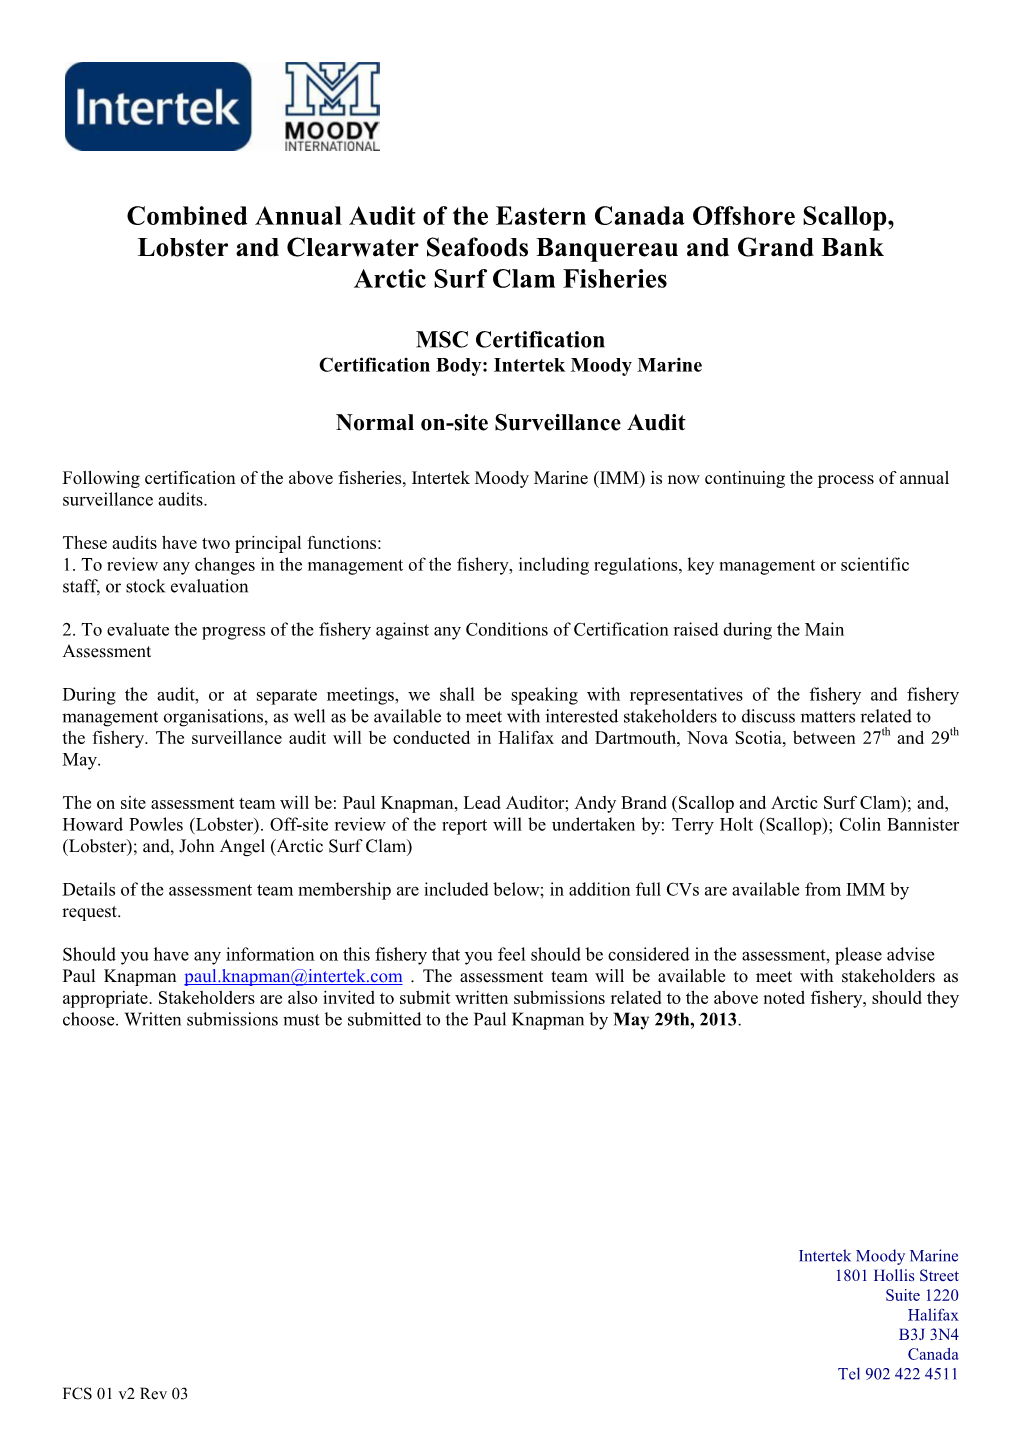 Combined Annual Audit of the Eastern Canada Offshore Scallop, Lobster and Clearwater Seafoods Banquereau and Grand Bank Arctic Surf Clam Fisheries